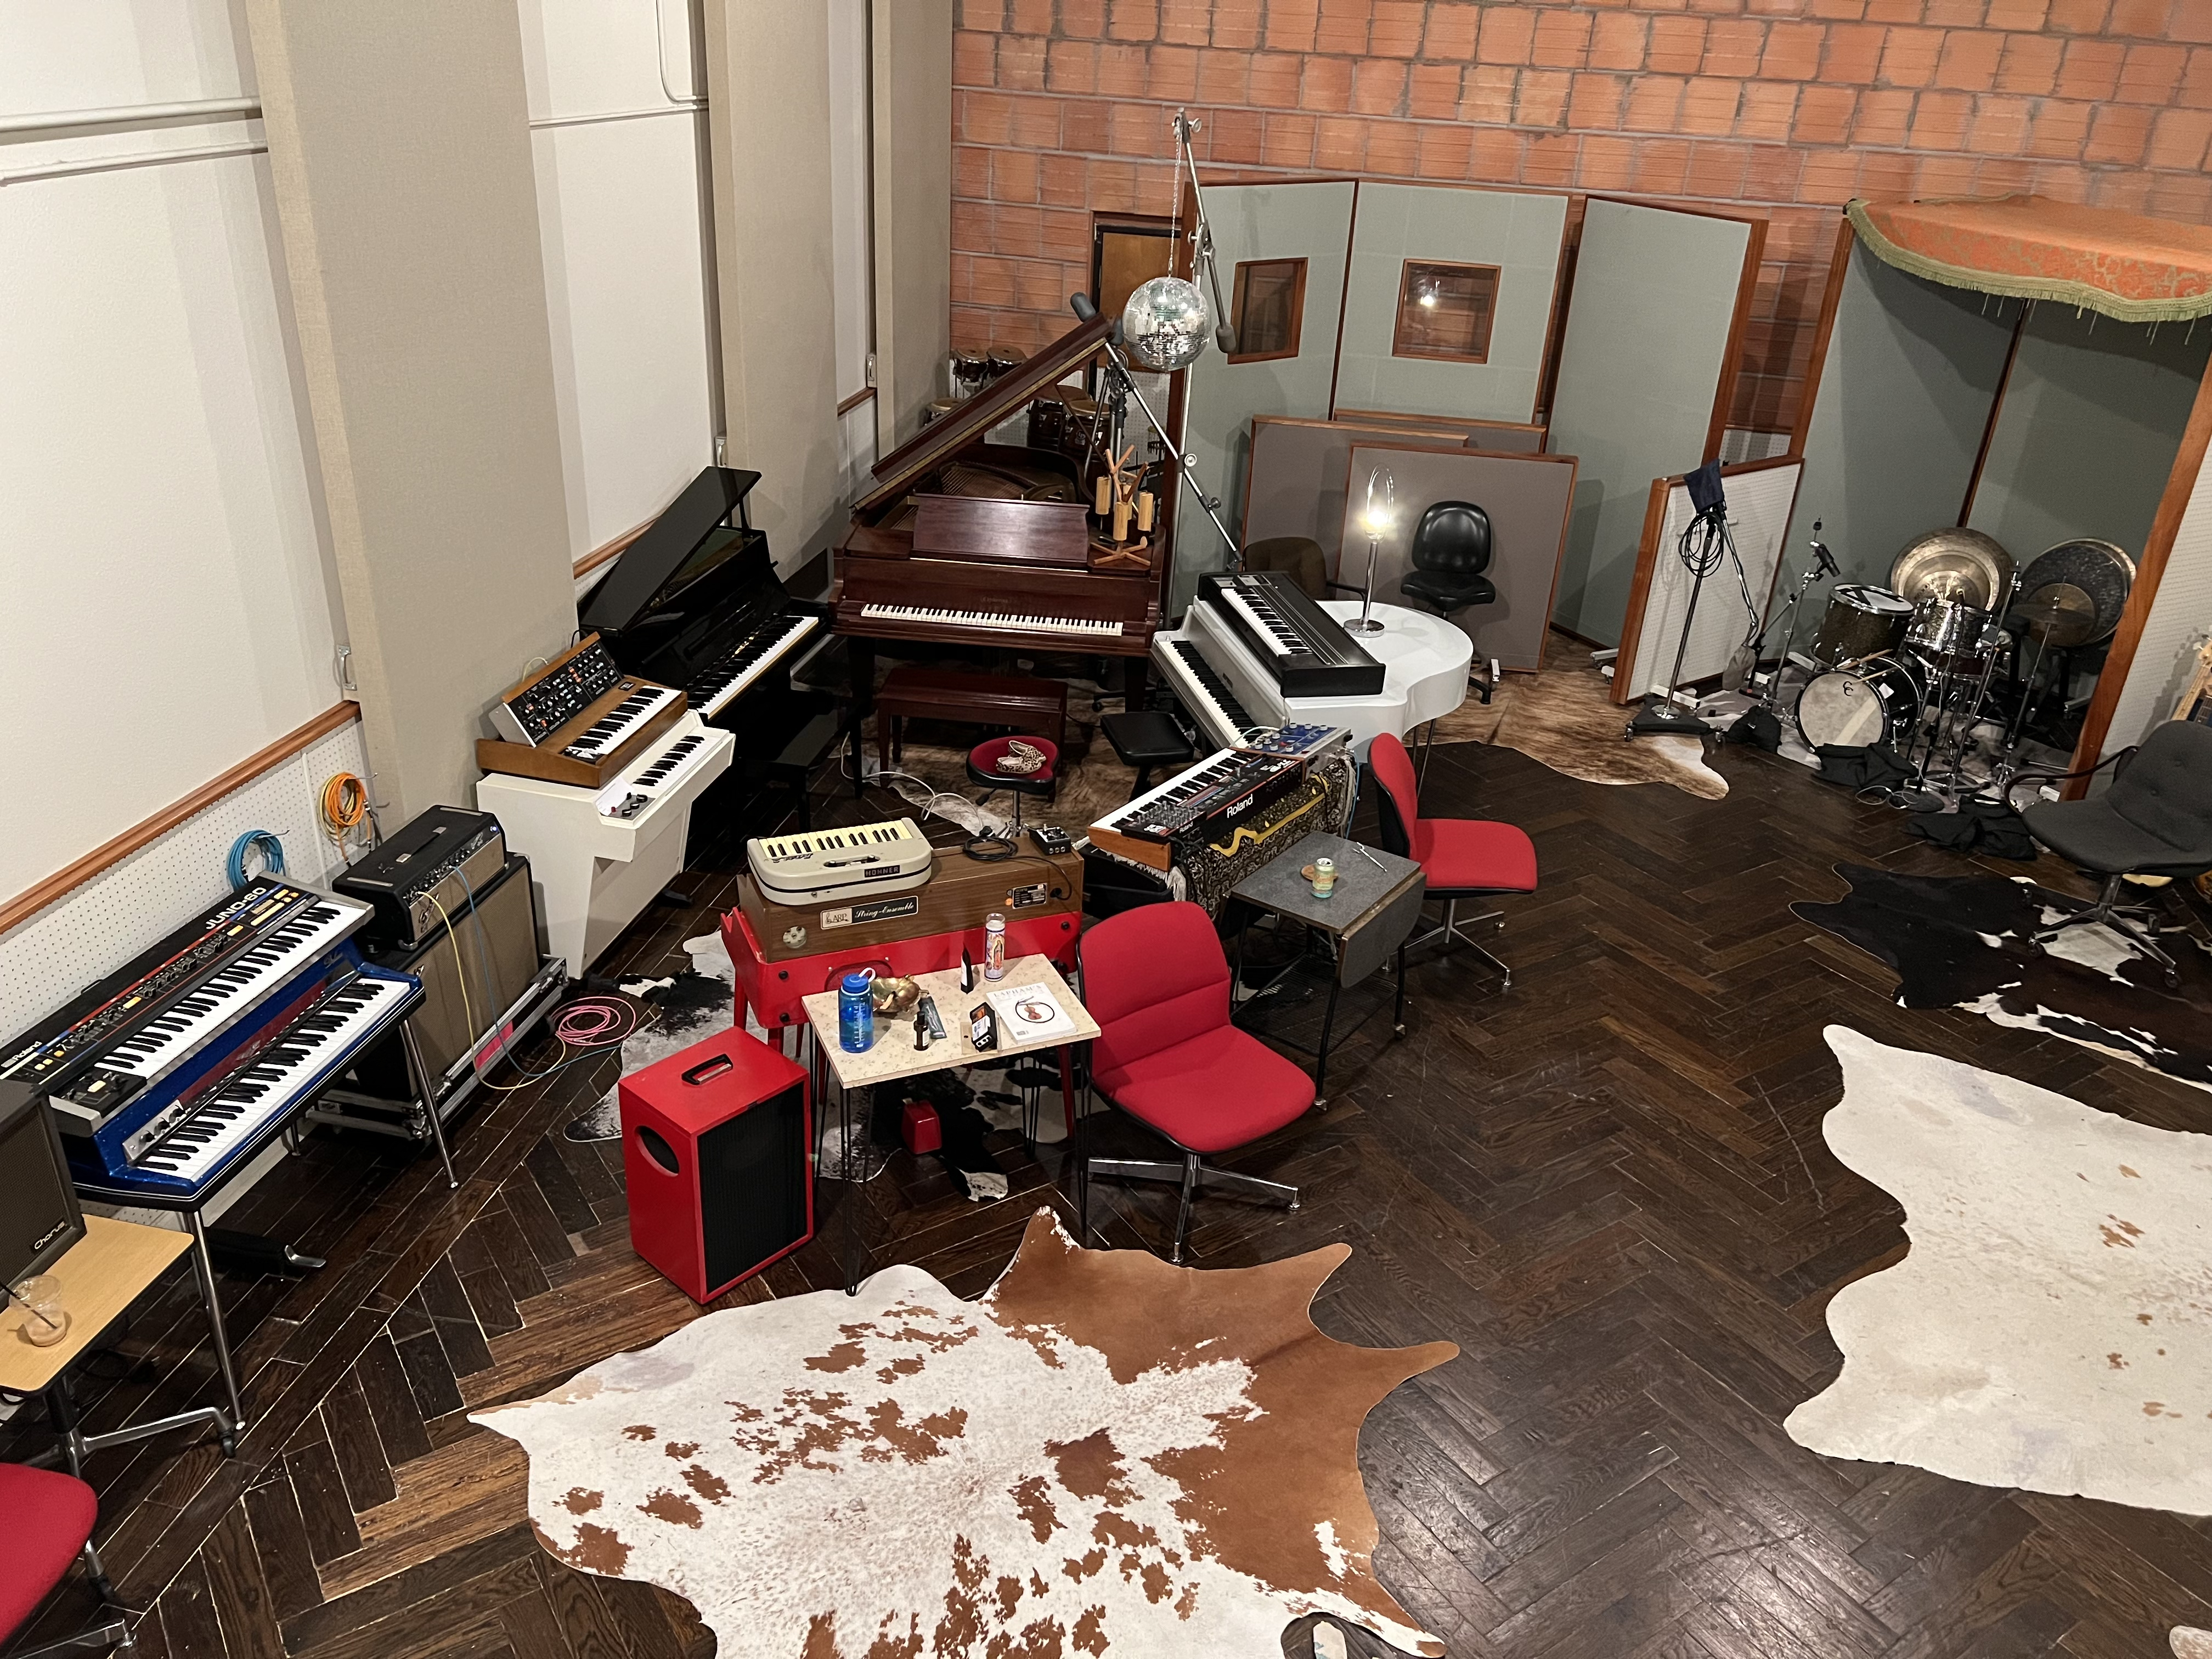 The inside of Niles City Sound shows an array of pianos, along with a cowskin rug and a disco ball hung above the instruments.